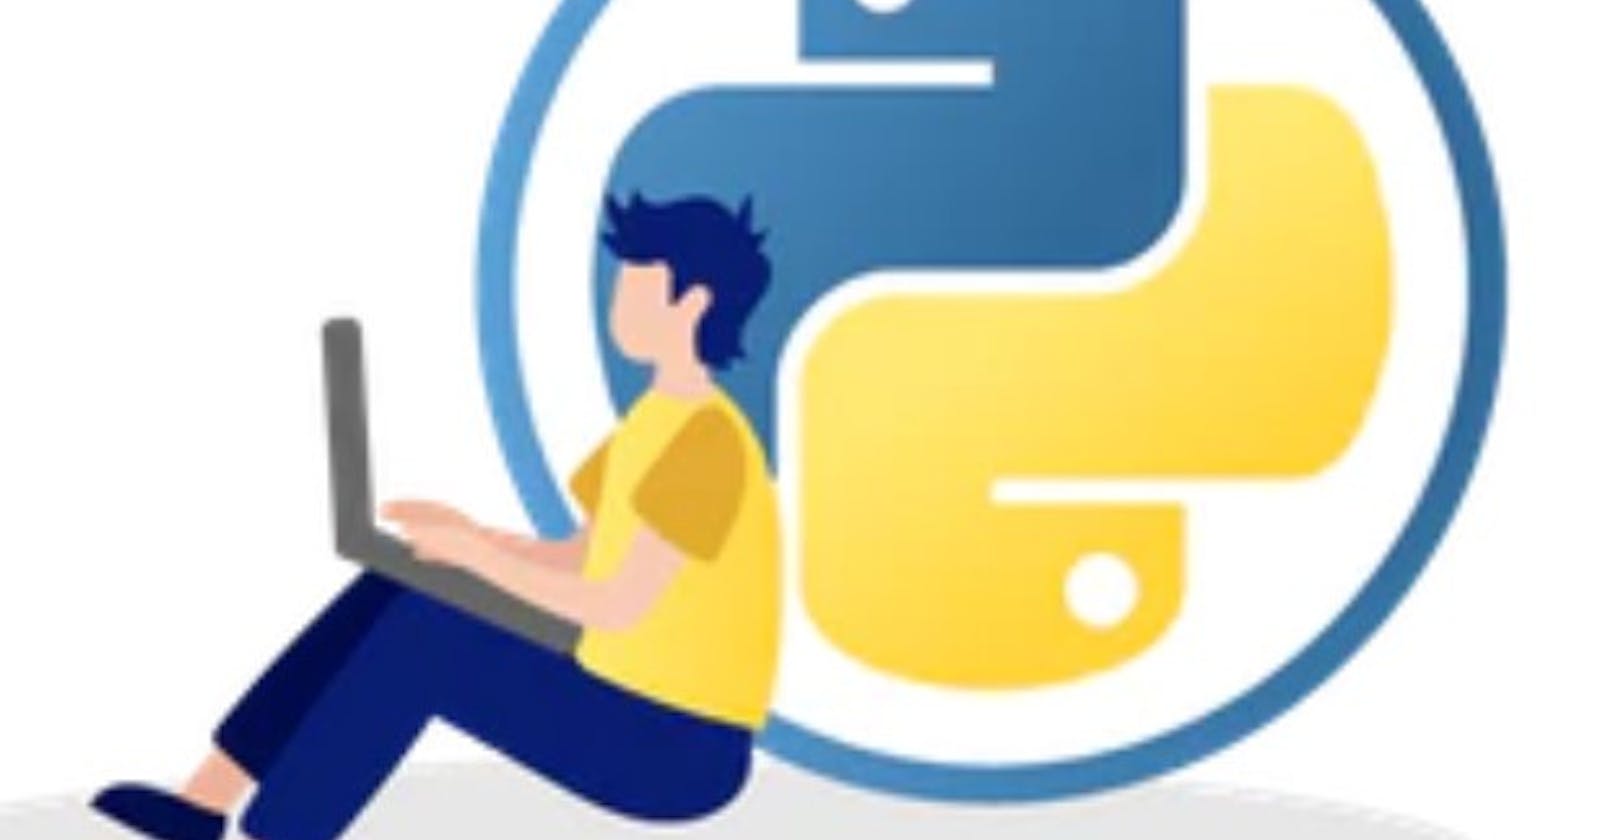 4 exciting Python conferences coming up in 2022